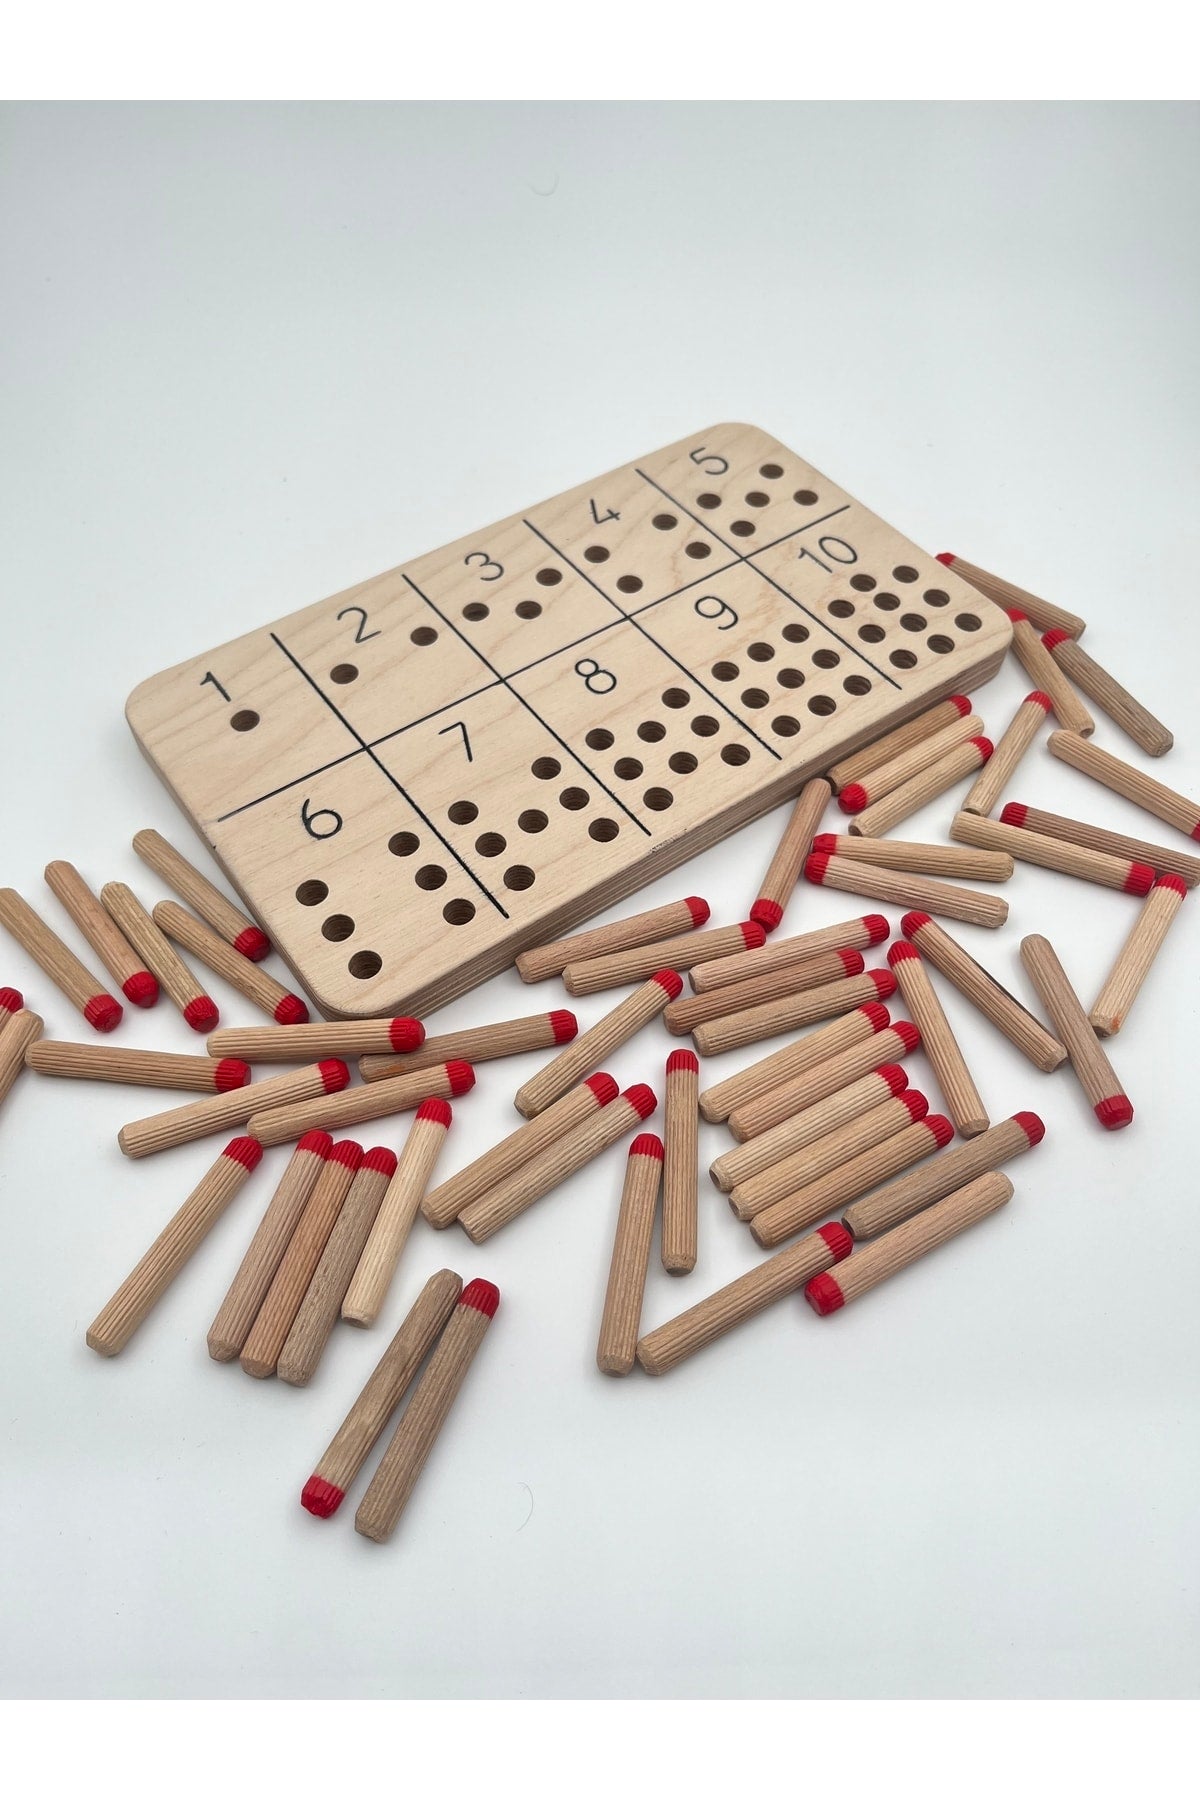 Number Learning Toy With Montessori Sticks, Counting Skill Educational Wooden Material